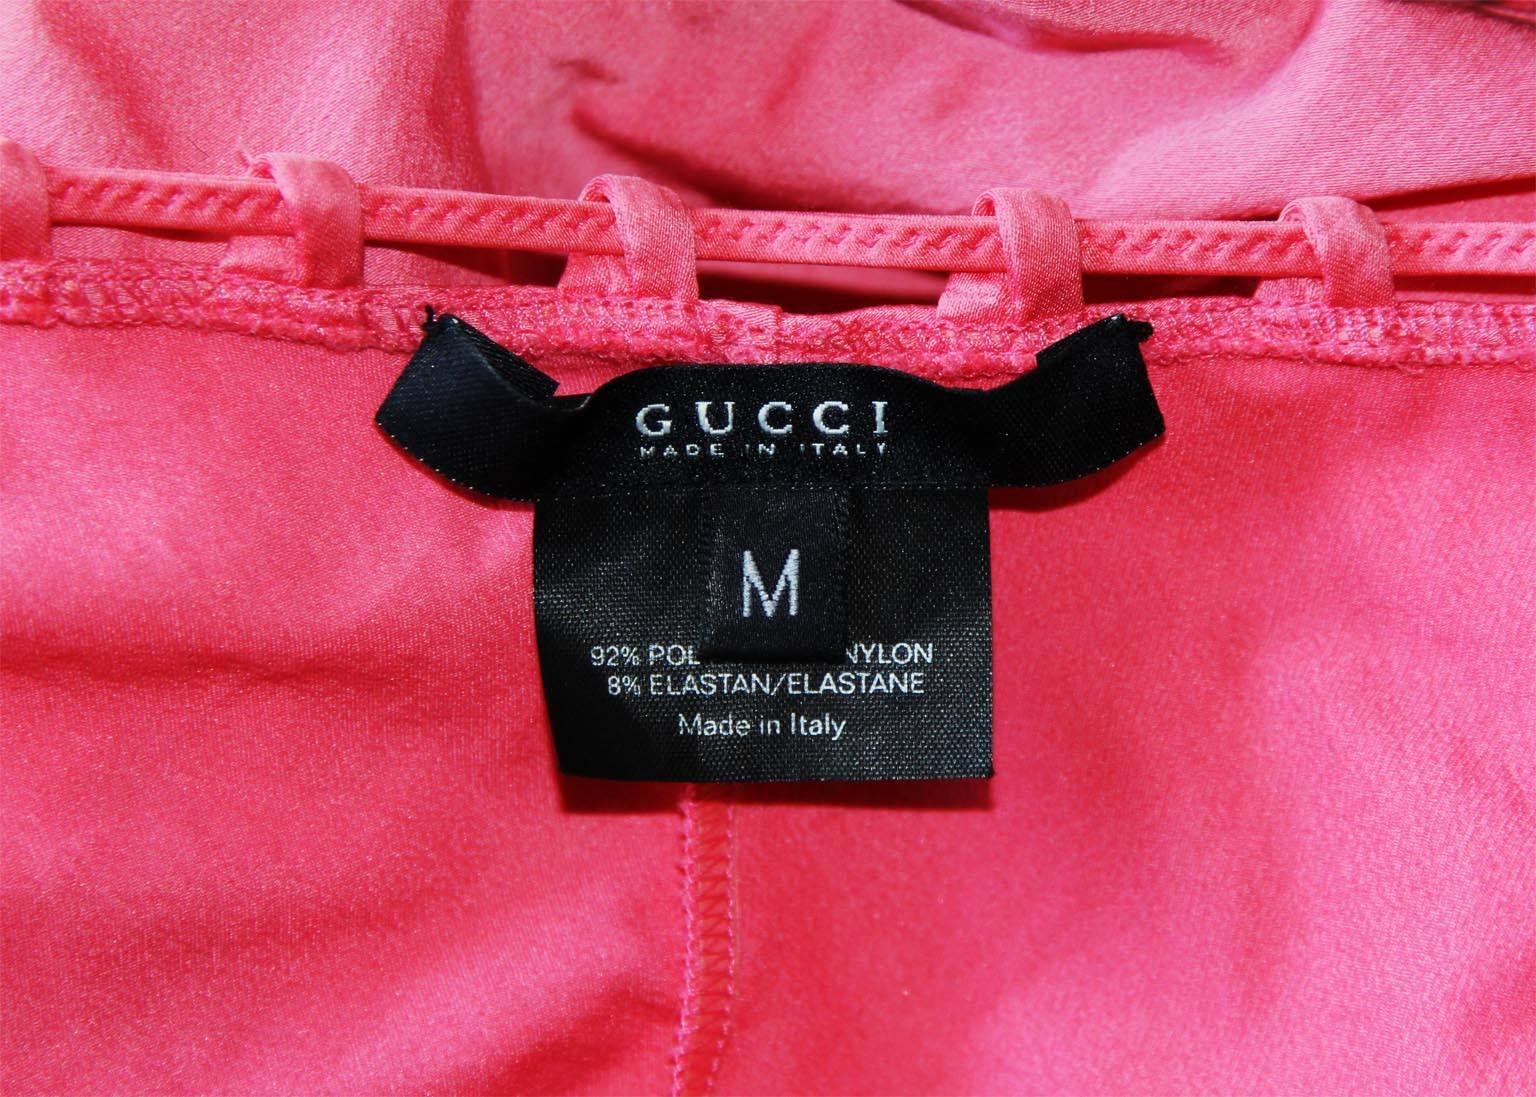 Women's Free Shipping: Iconic Tom Ford Gucci 2004 Runway Collection Coral Pink Swimsuit!